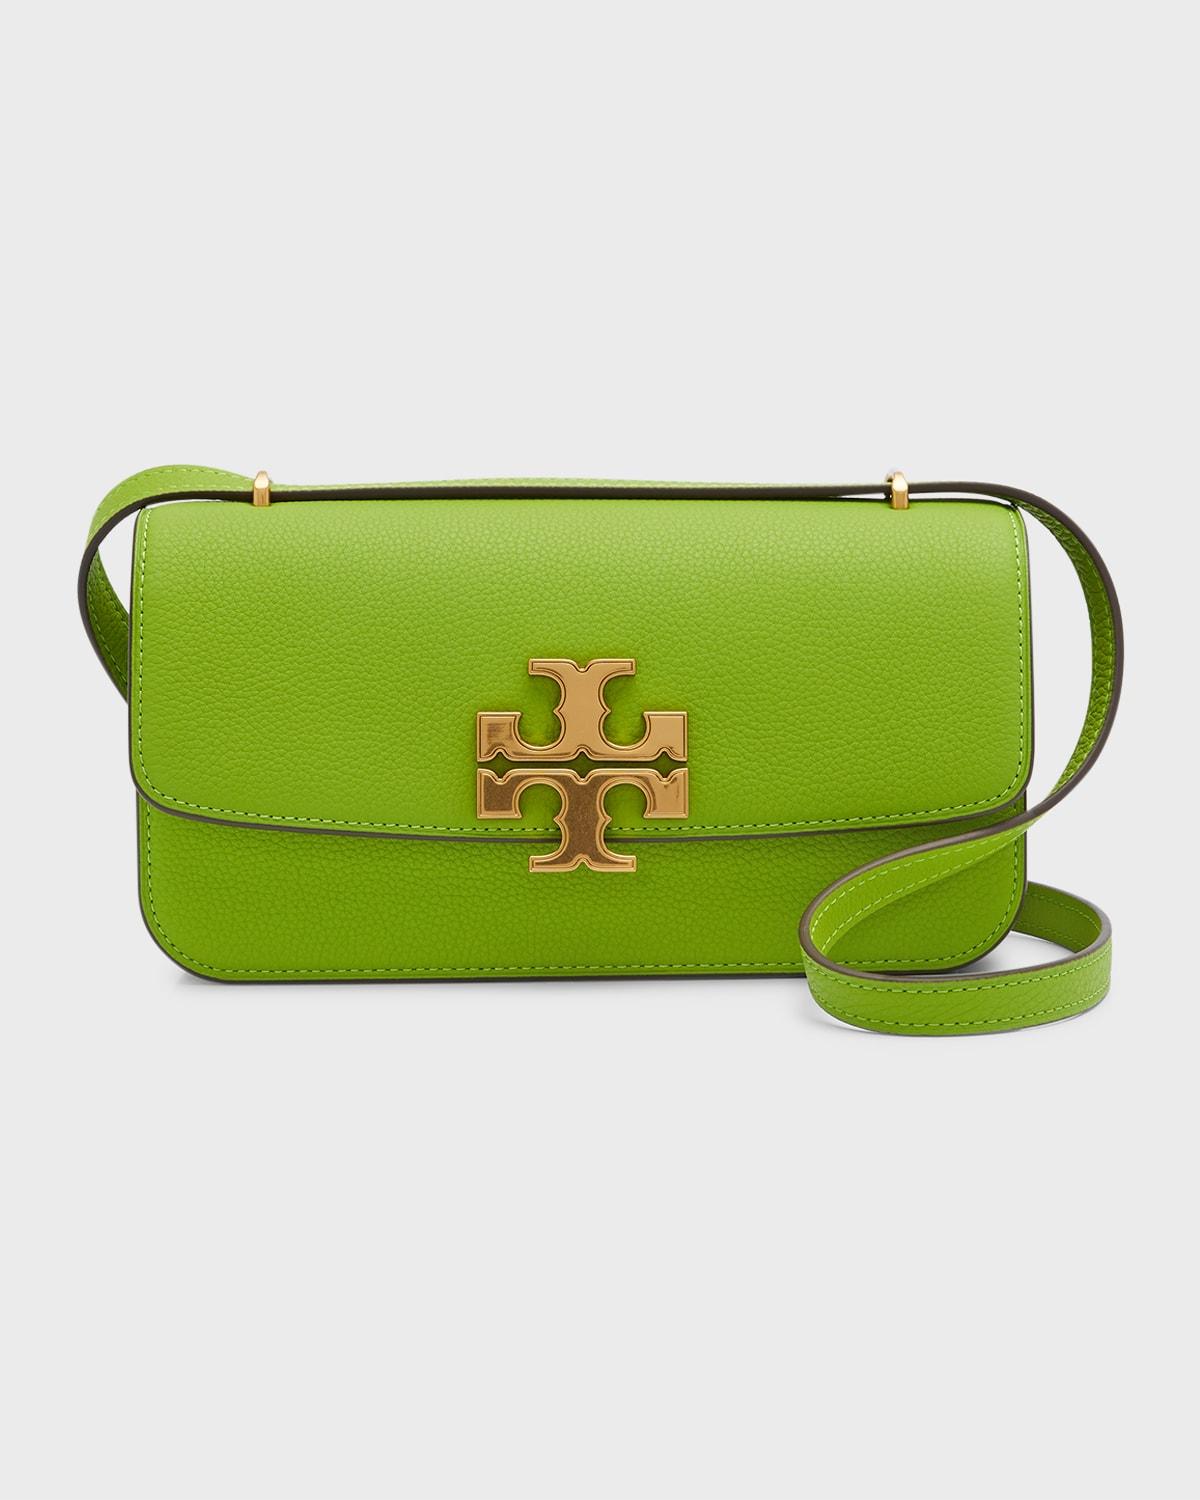 Tory Burch Eleanor Small Pebbled East-west Shoulder Bag in Green | Lyst